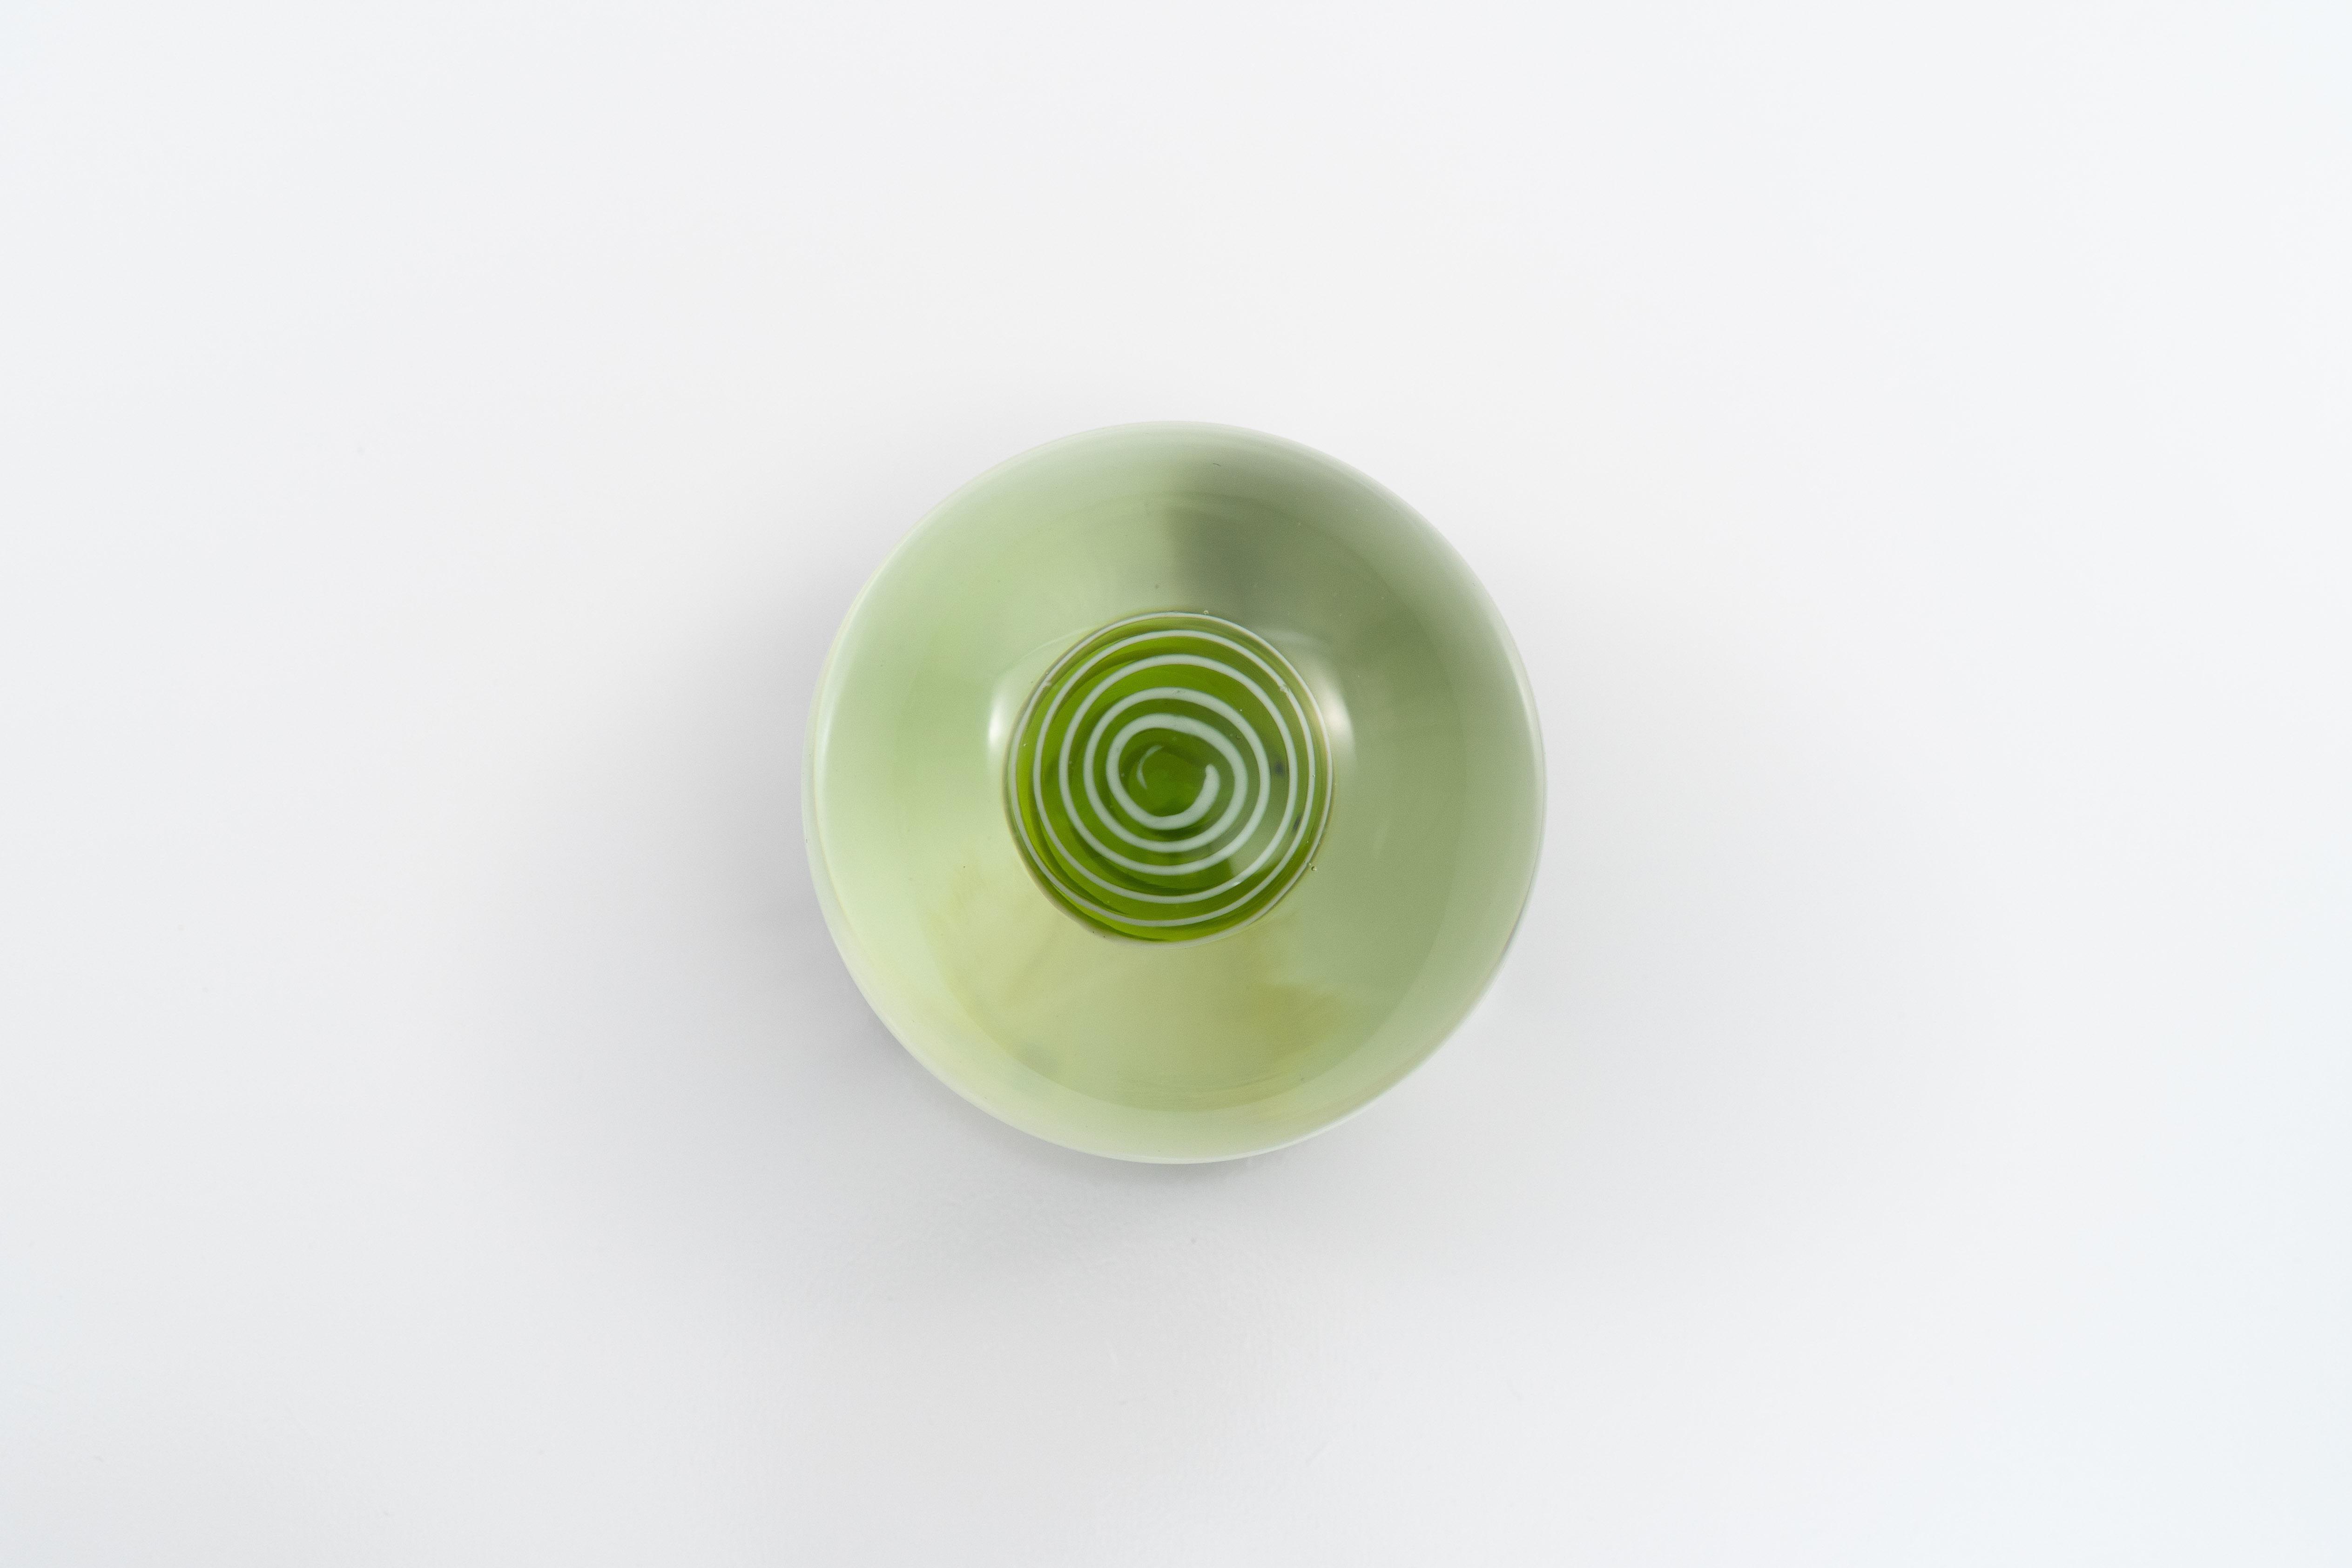 Blown Glass Large Murano Glass Paperweight with Green and White Swirled Core by Salviati